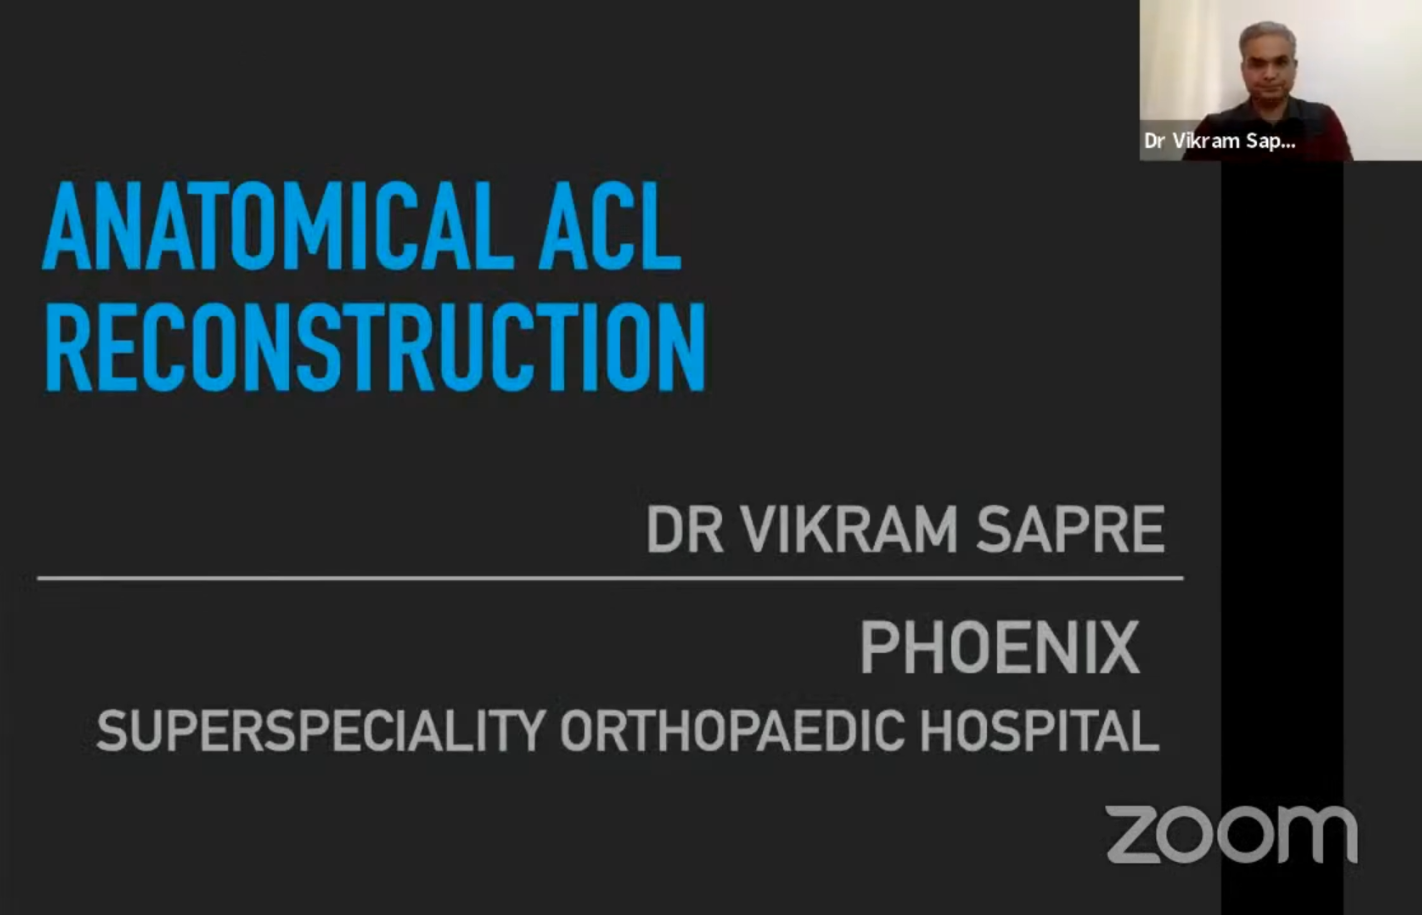 Anatomical ACL Reconstruction Dr Vikram Sapre PHONIX Superspecialty Orthopaedic Hospital